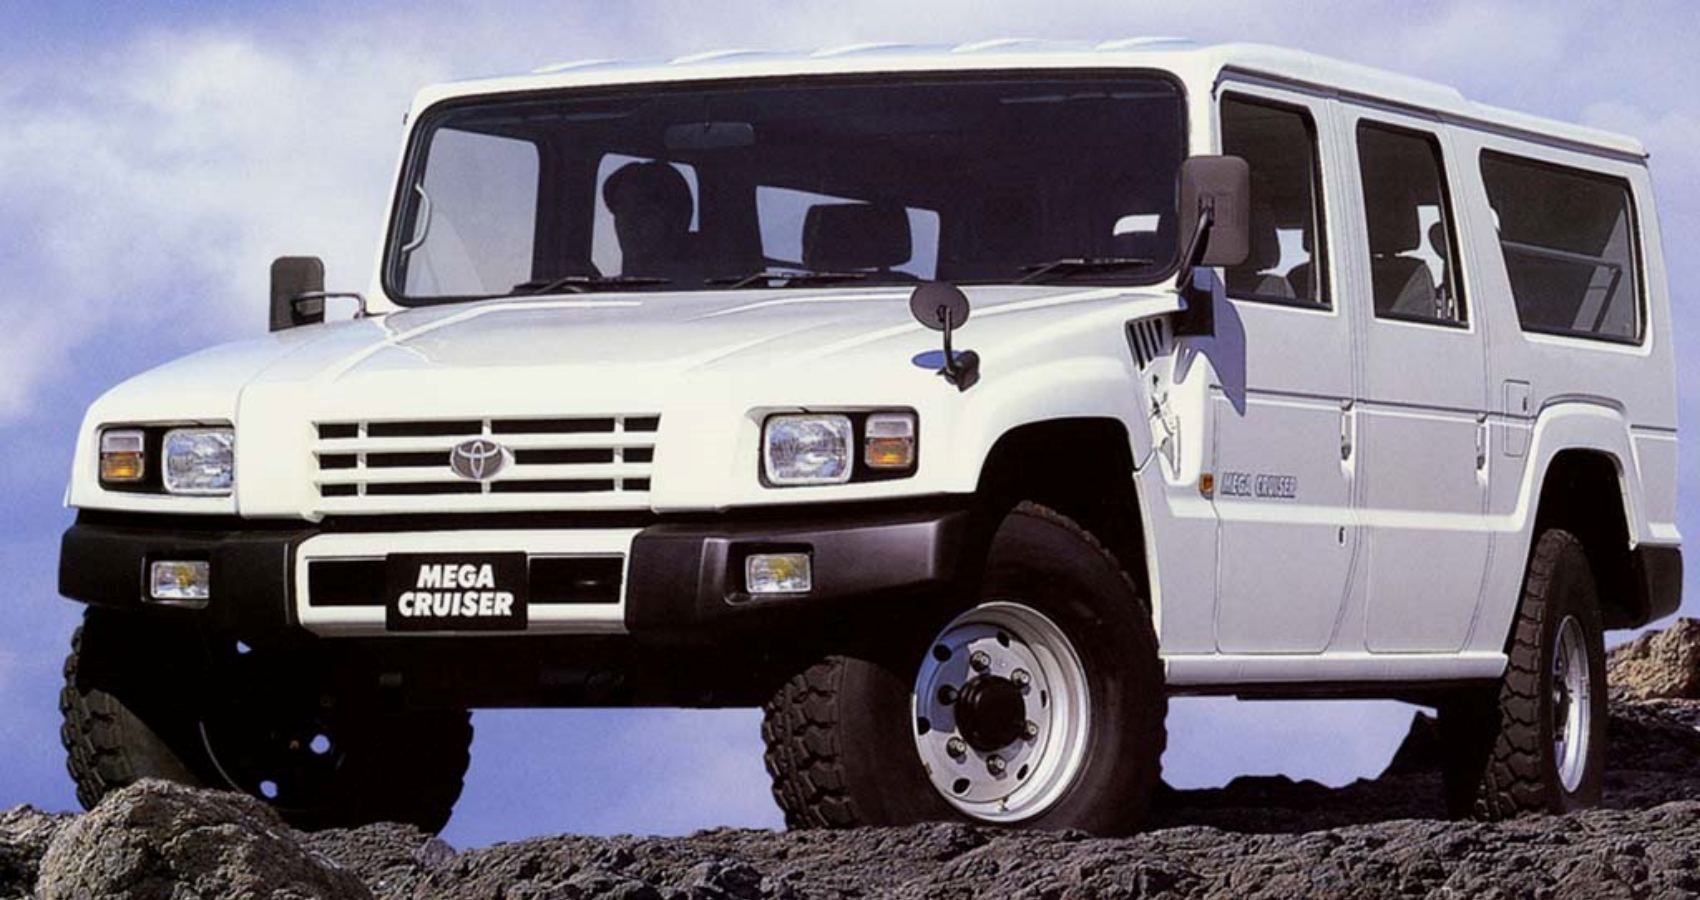 Here's How The Toyota's Mega Cruiser Is More Outrageous Than The H1 Hummer